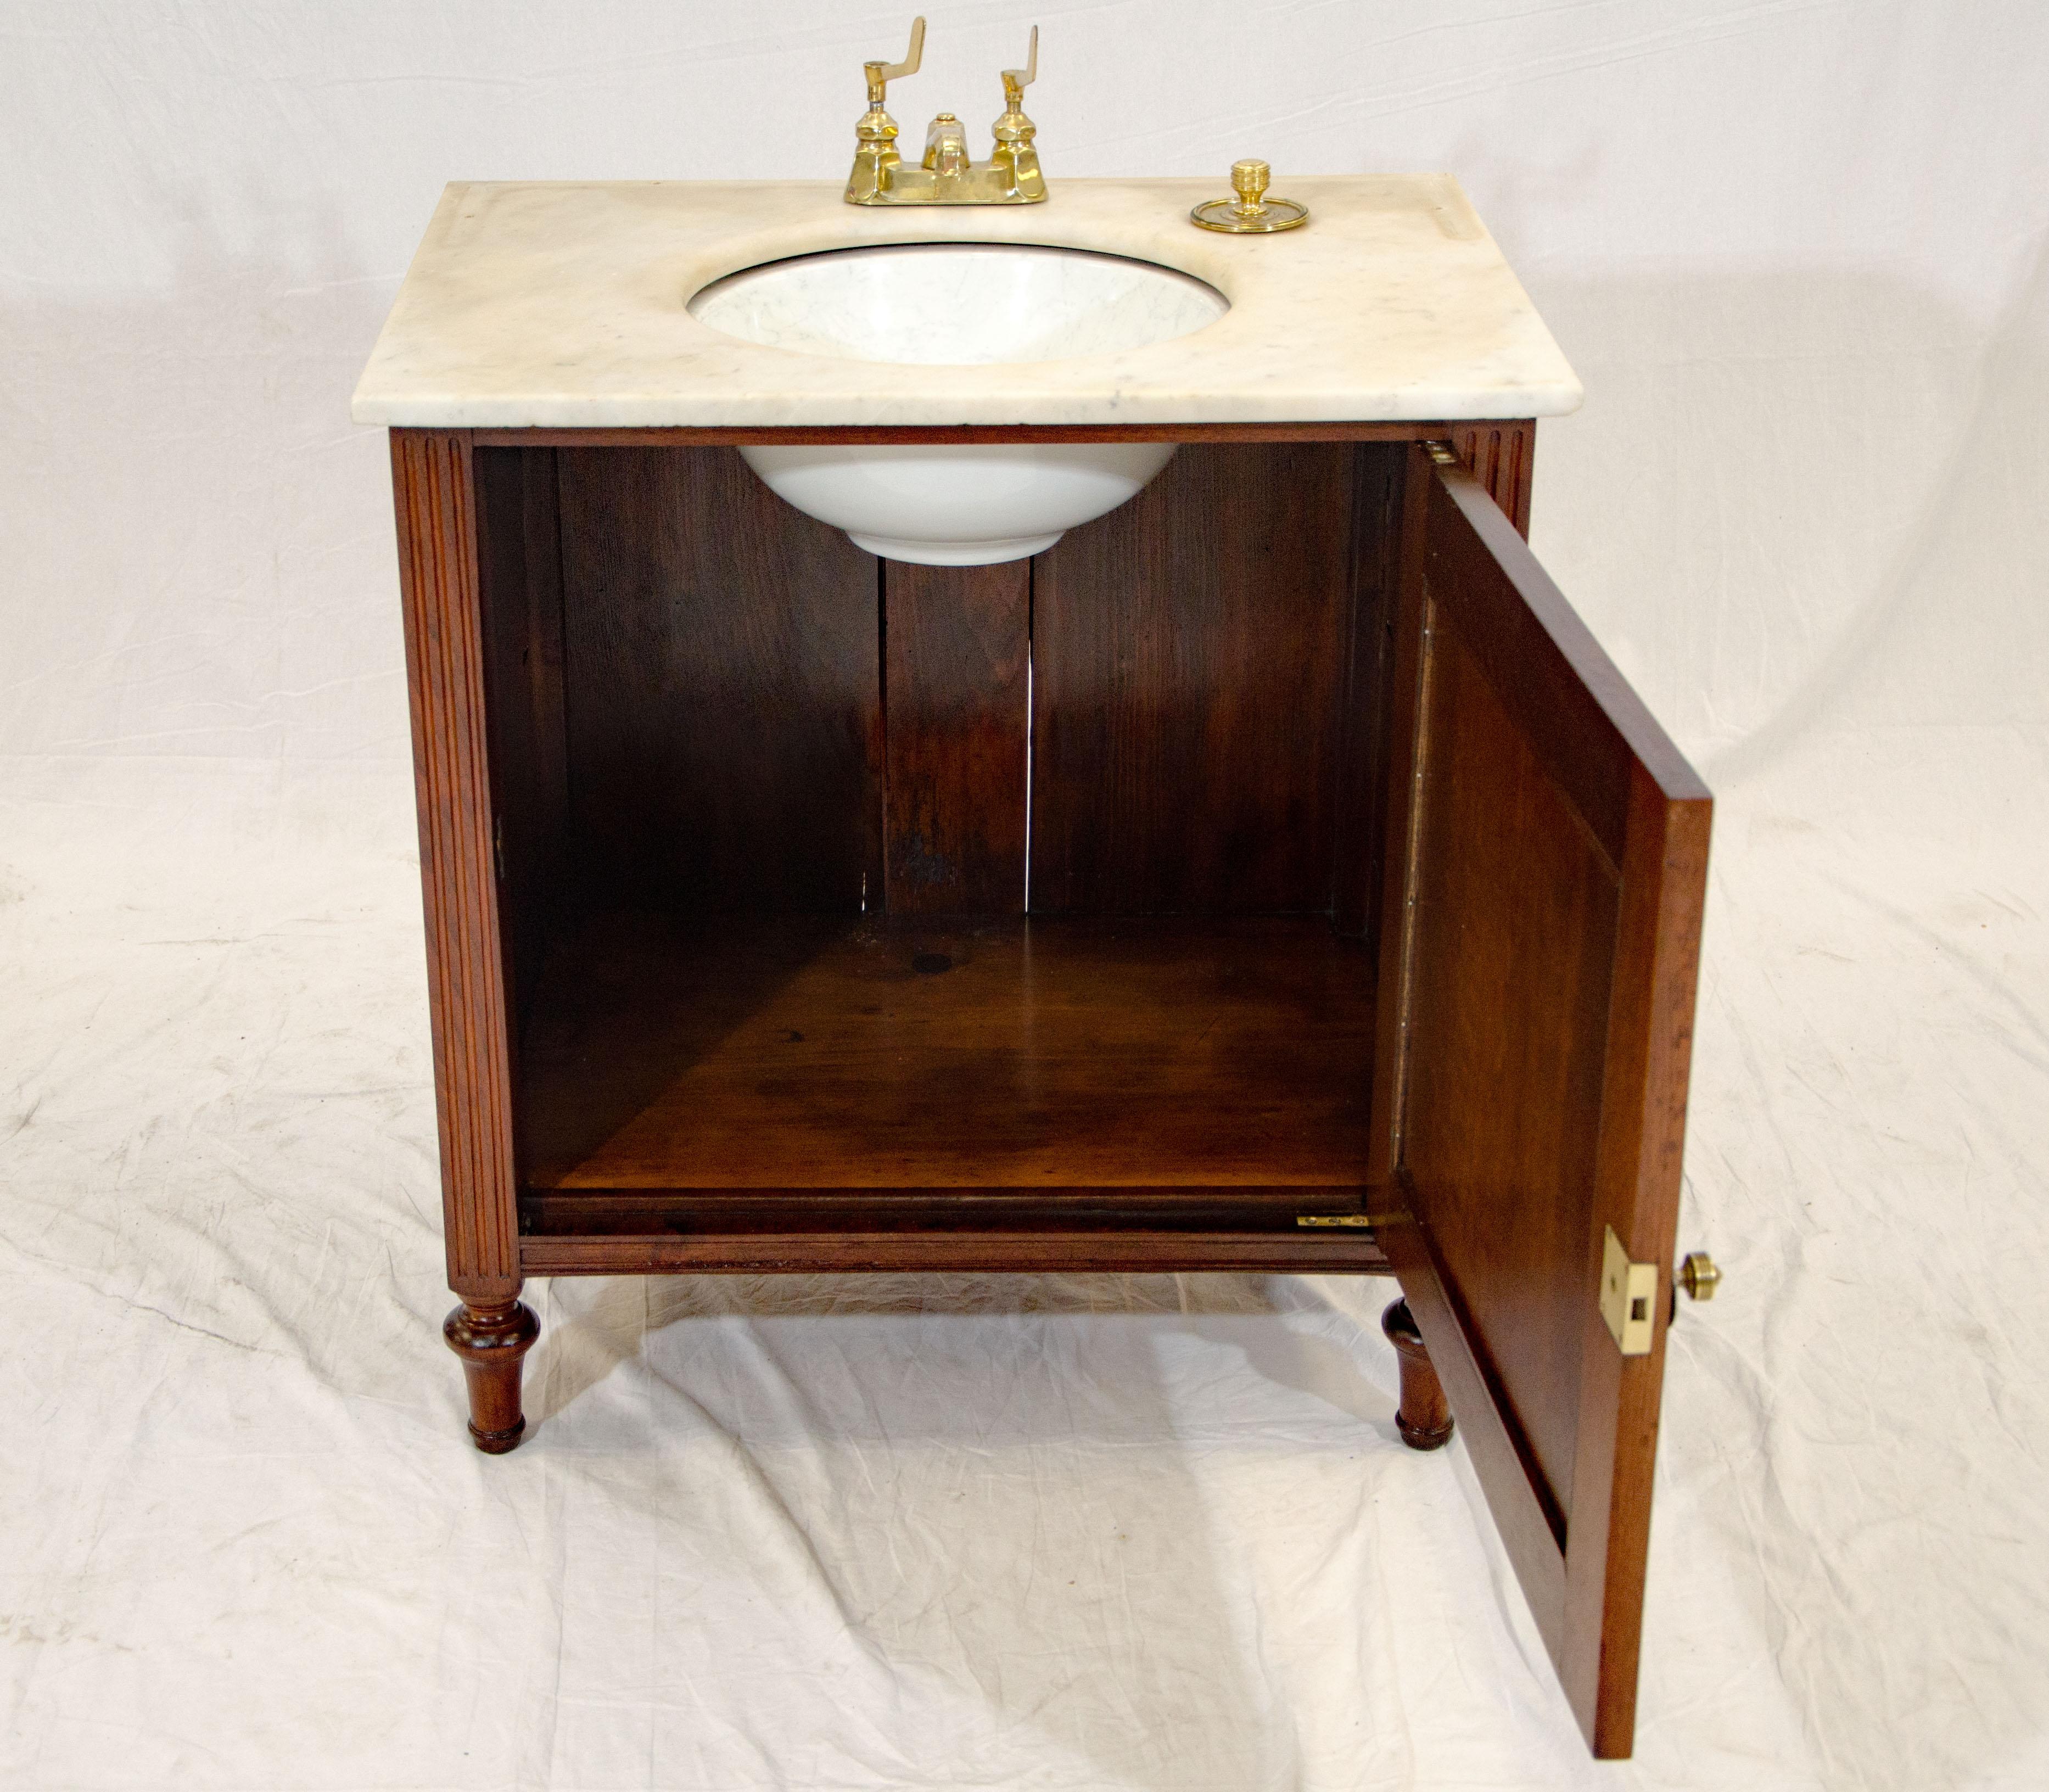 This Victorian walnut cabinet has a marble top, a circular sink, and brass fixtures. There is evidence of a marble backsplash being attached at one time. You can customize the sink with marble or waterproof wooden gallery backsplash. The brass